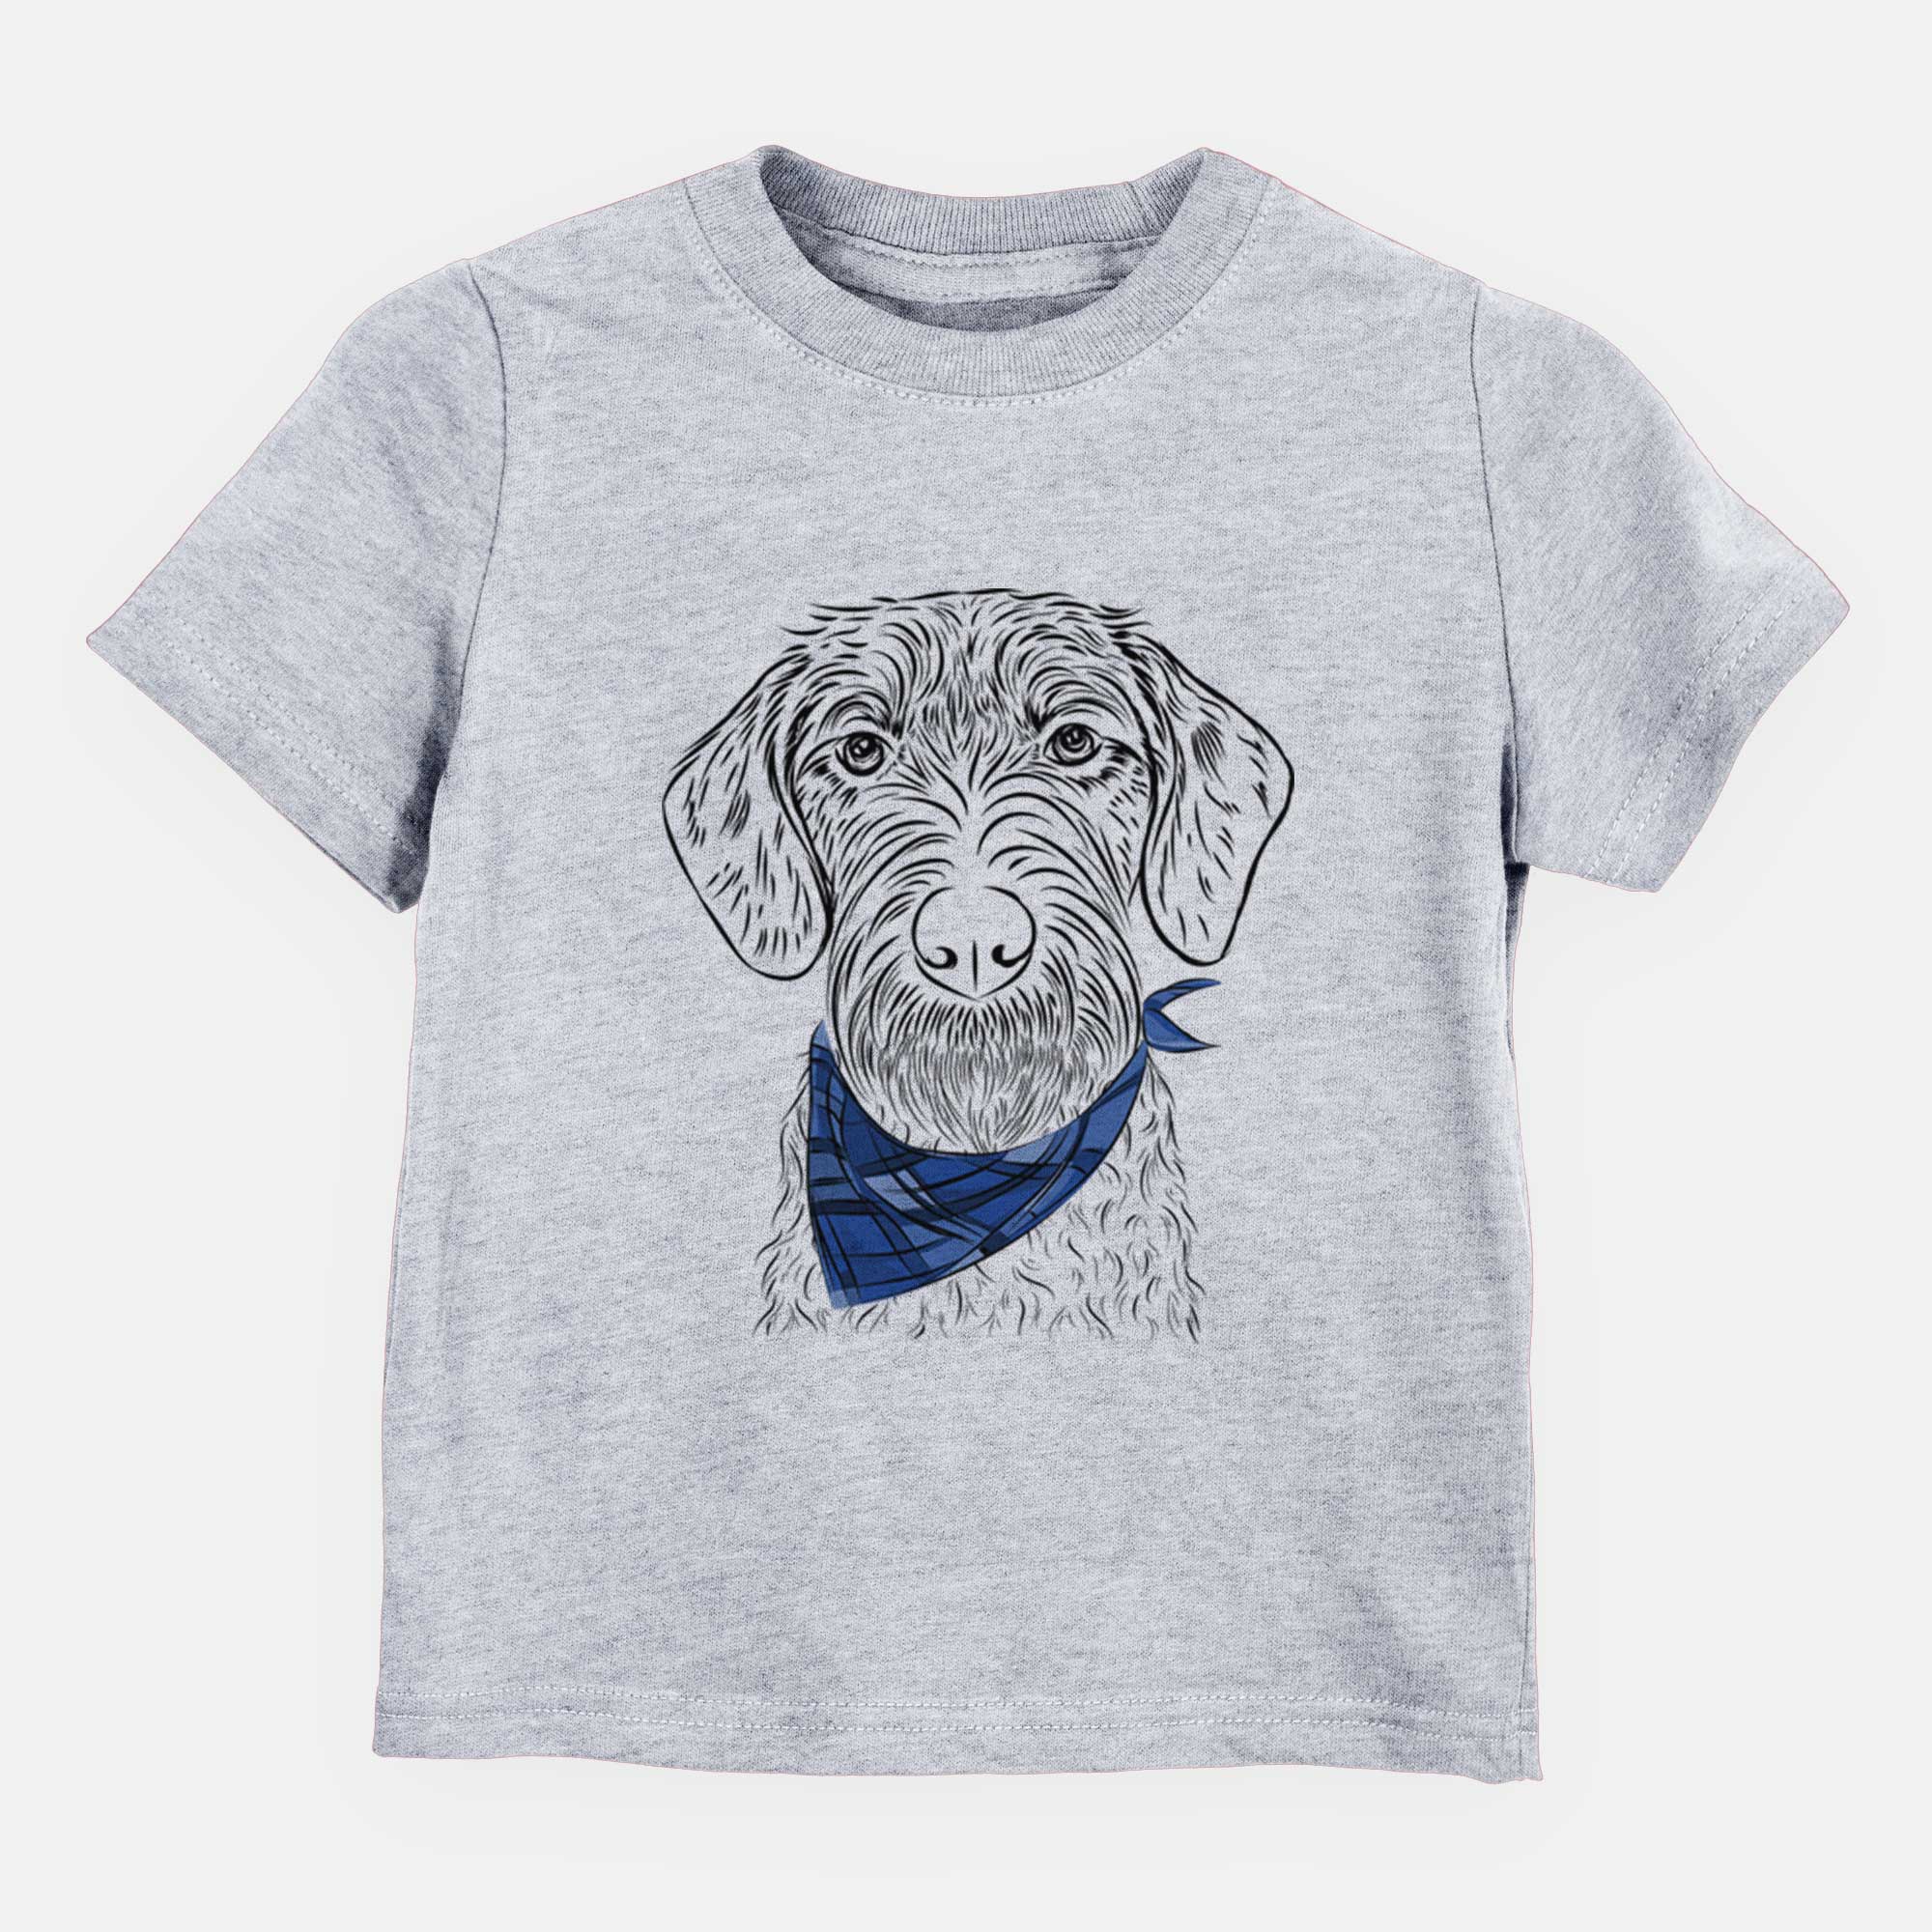 Bandana Gus the German Wirehaired Pointer - Kids/Youth/Toddler Shirt